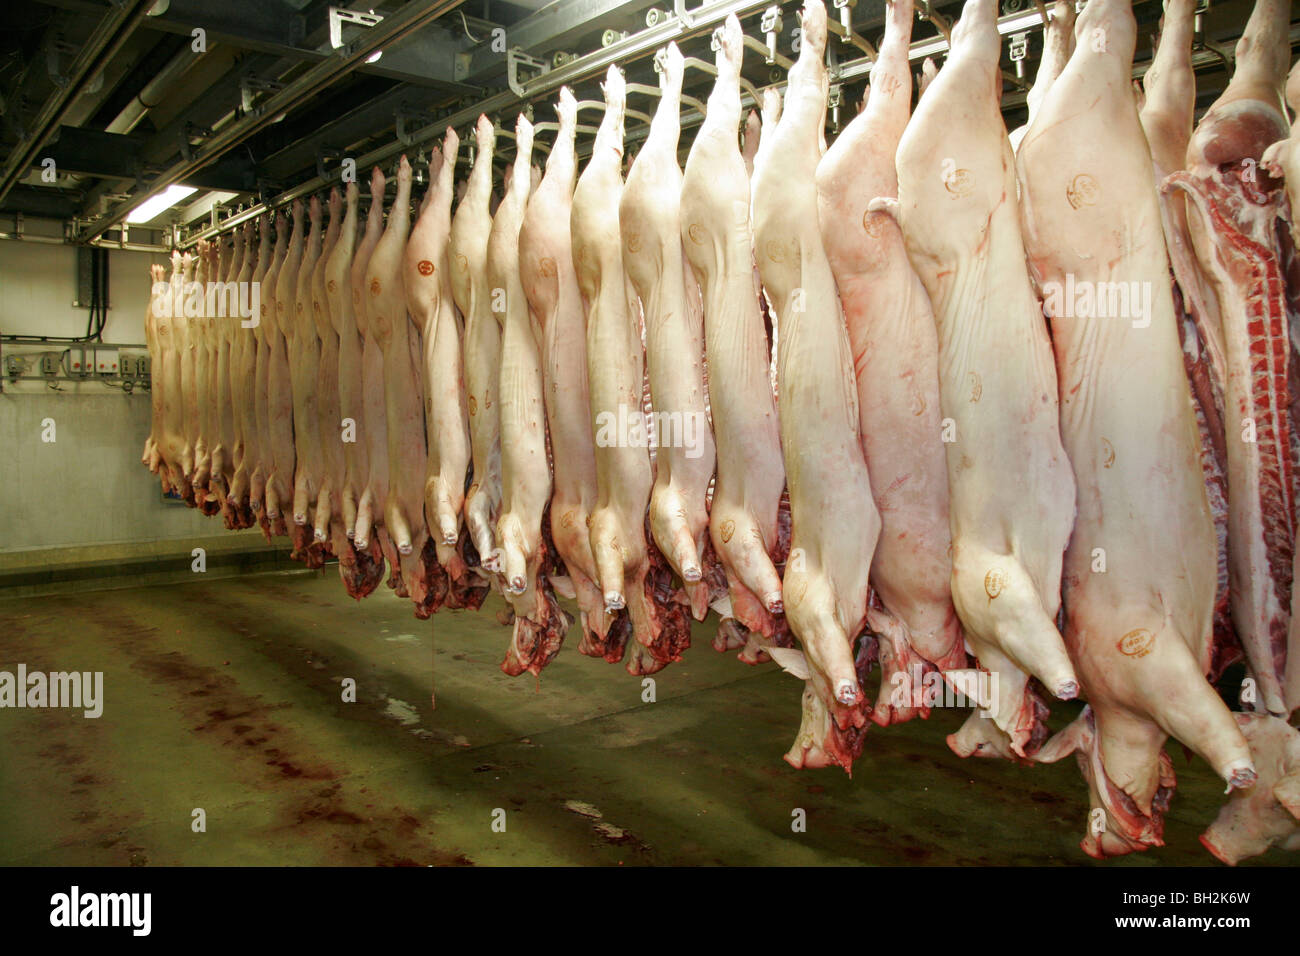 Pig carcasses hanging in a slaughterhouse Stock Photo - Alamy